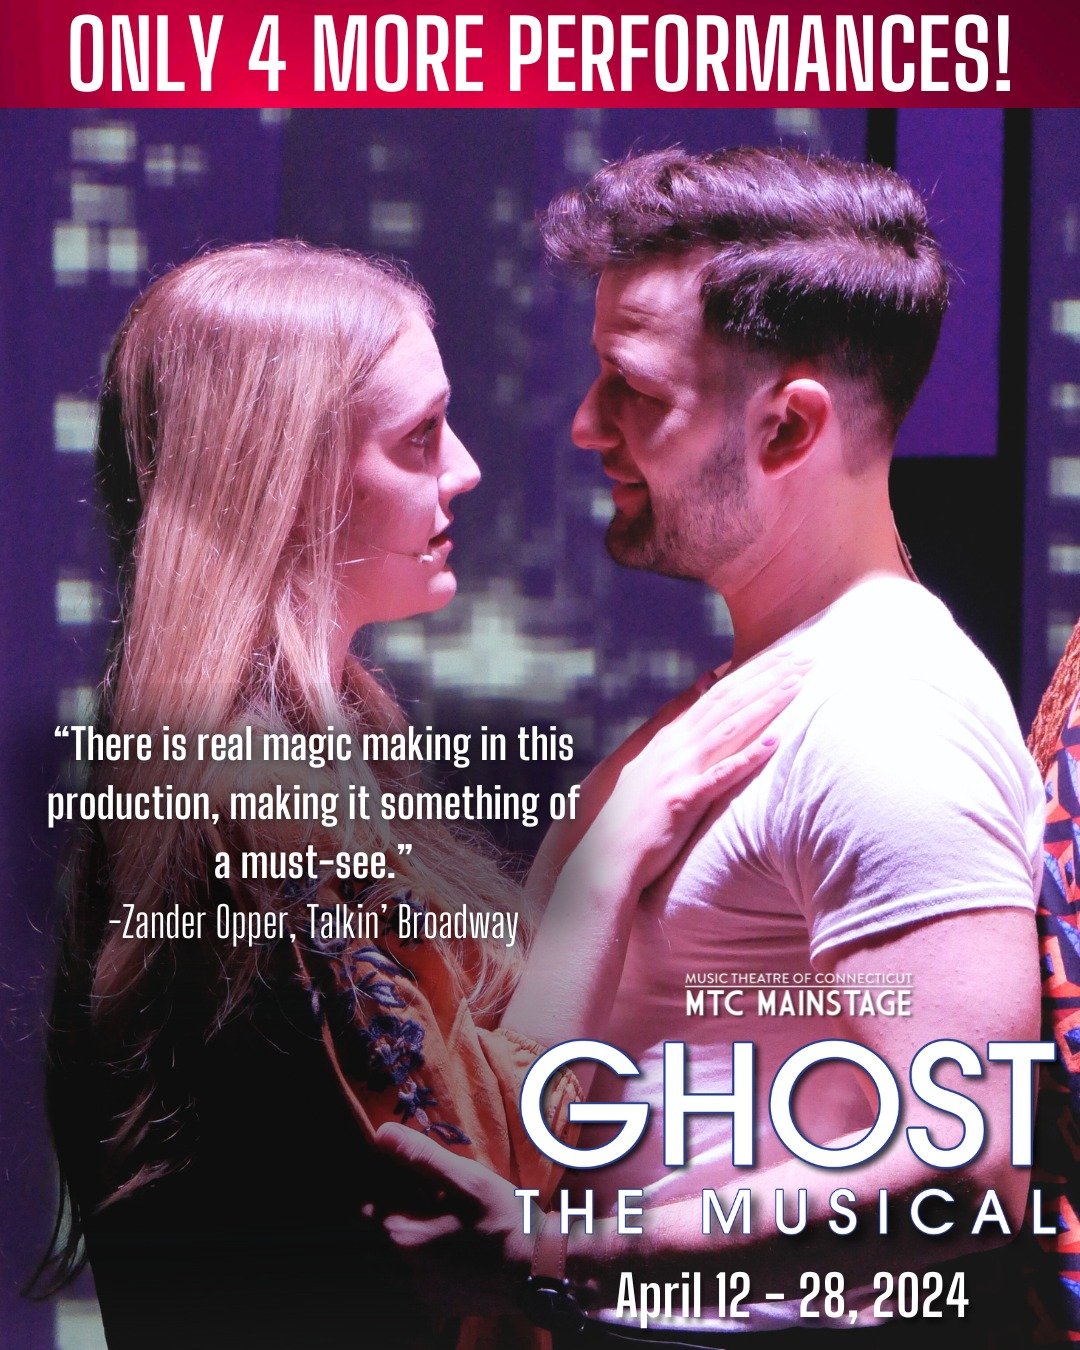 💙✨ONE FINAL WEEKEND TO SEE GHOST!✨💙

Don't miss your chance to see GHOST THE MUSICAL! The final four performances begin this FRIDAY with some almost sold out! Grab your tickets now before they're gone and see why audiences can't stop raving about M